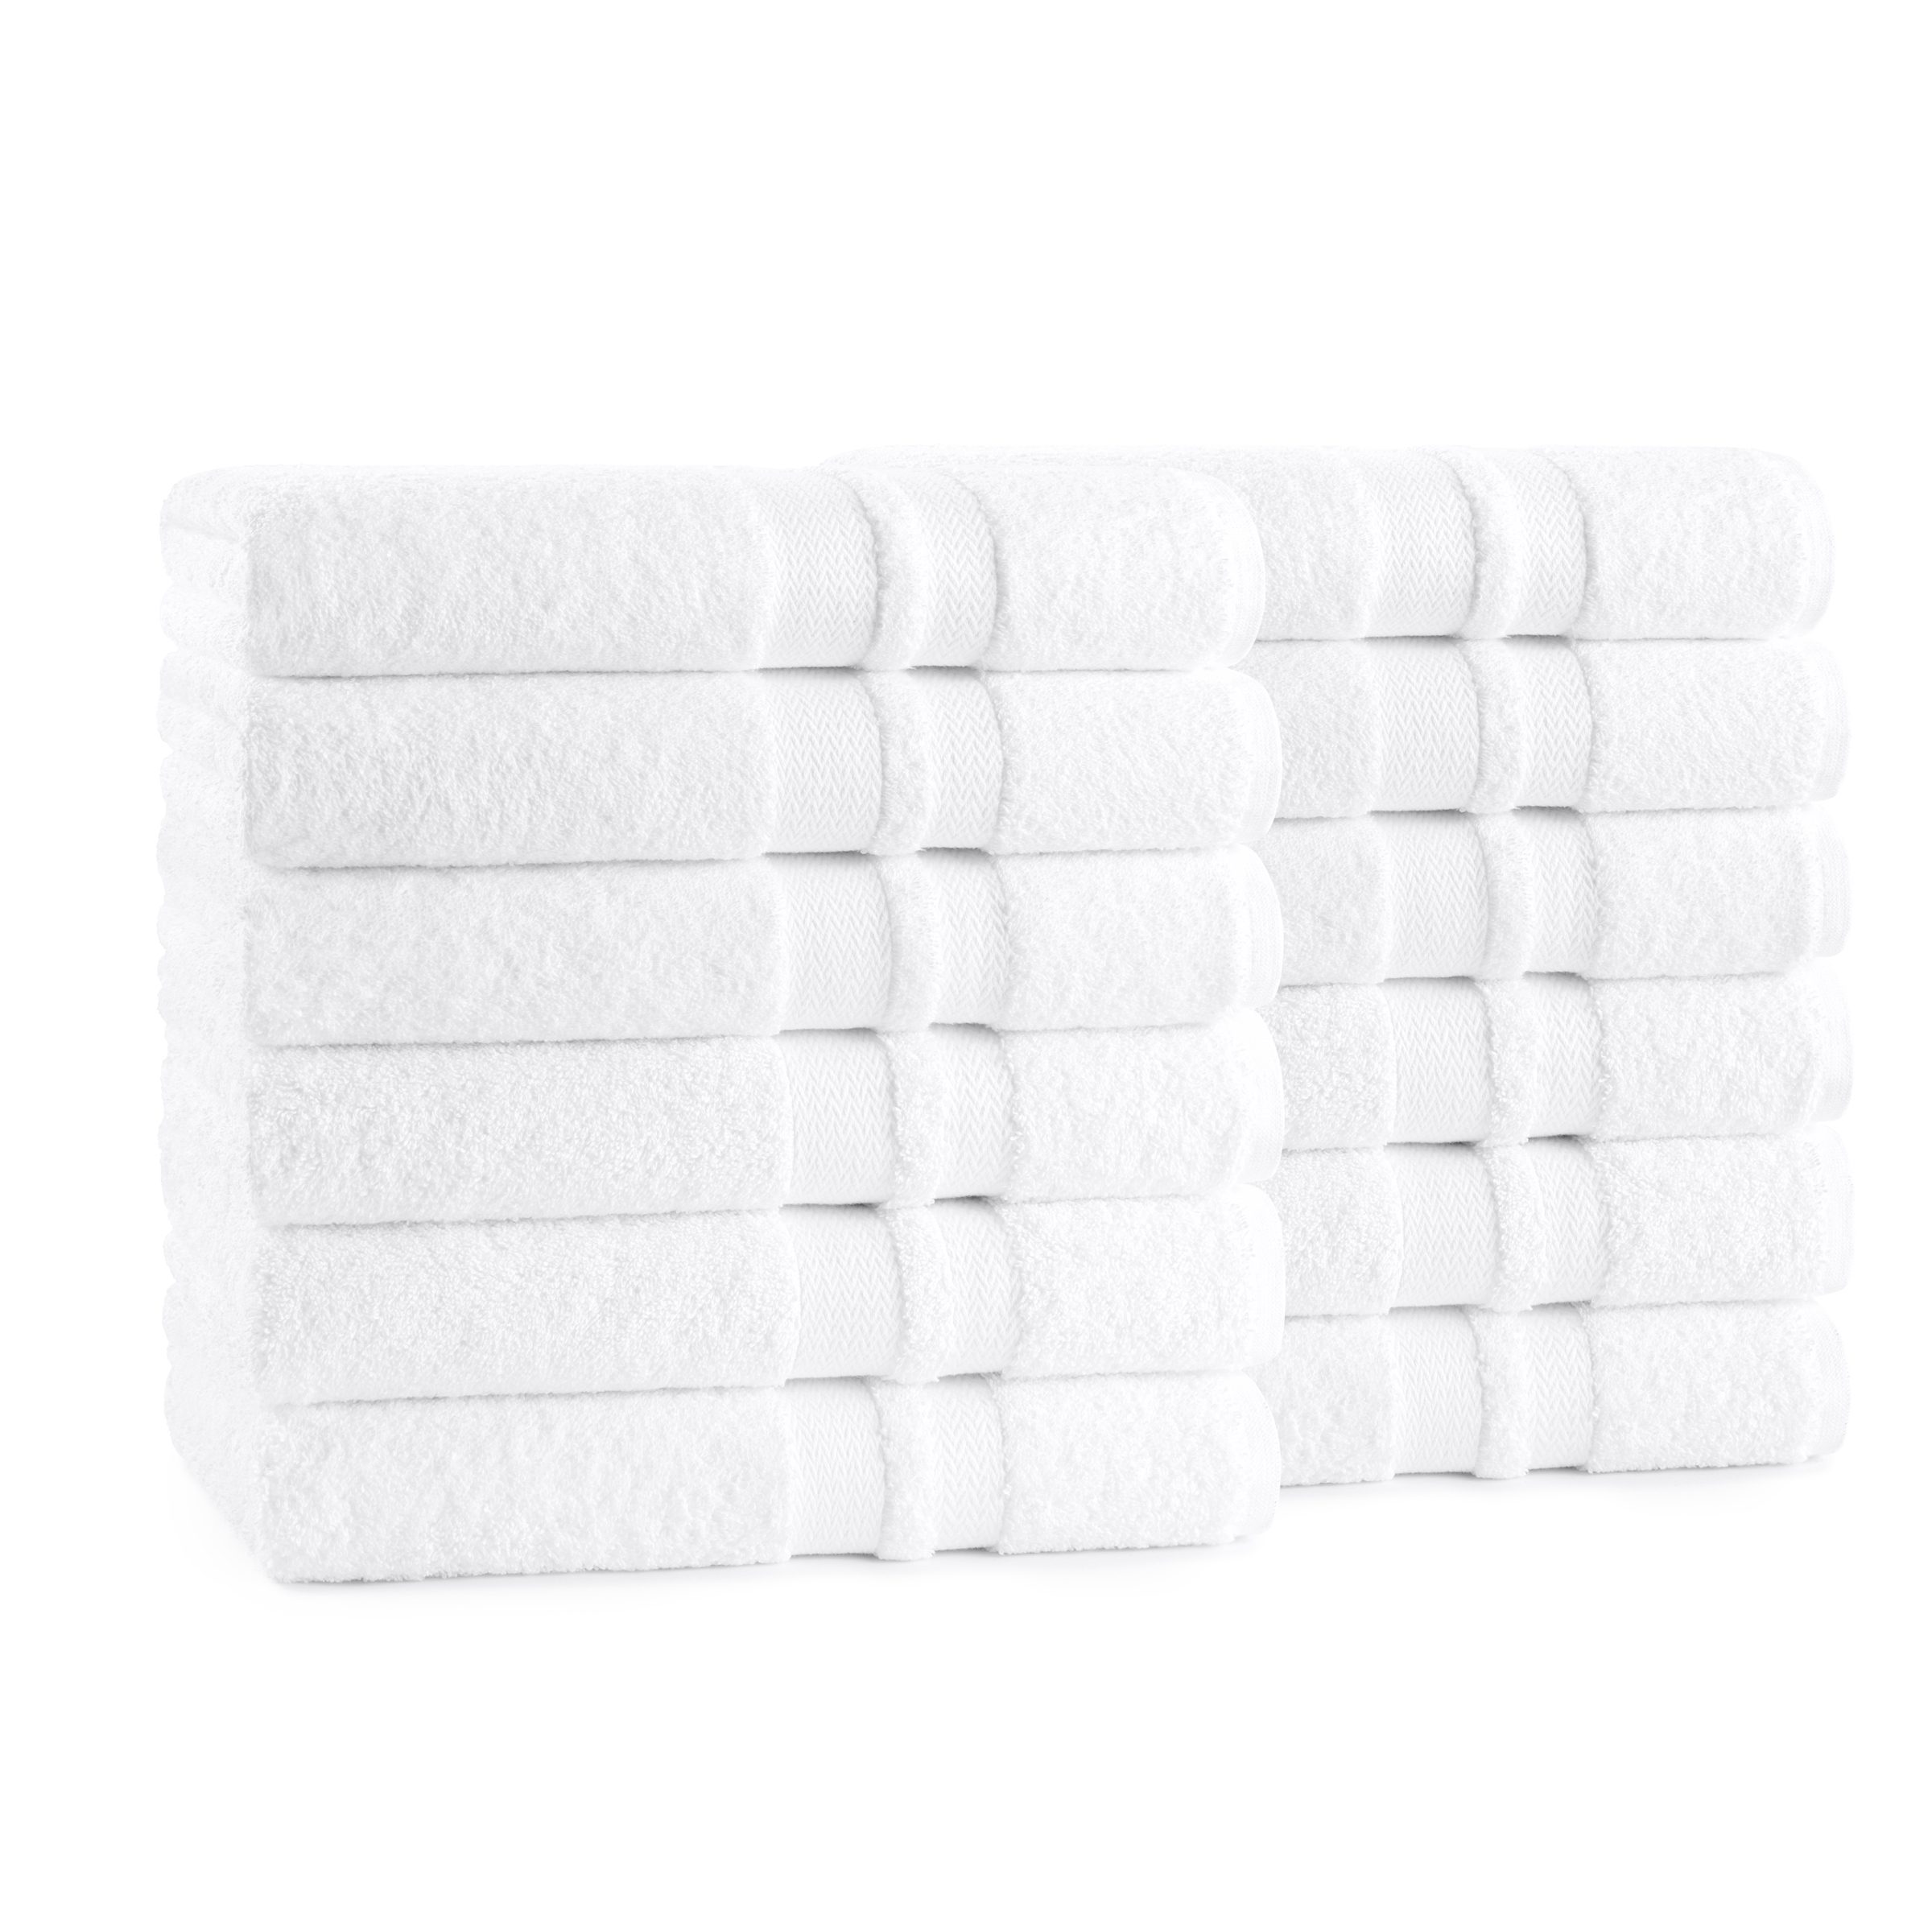 Bar Towels Heavyweight Cotton Terry 14x16 White